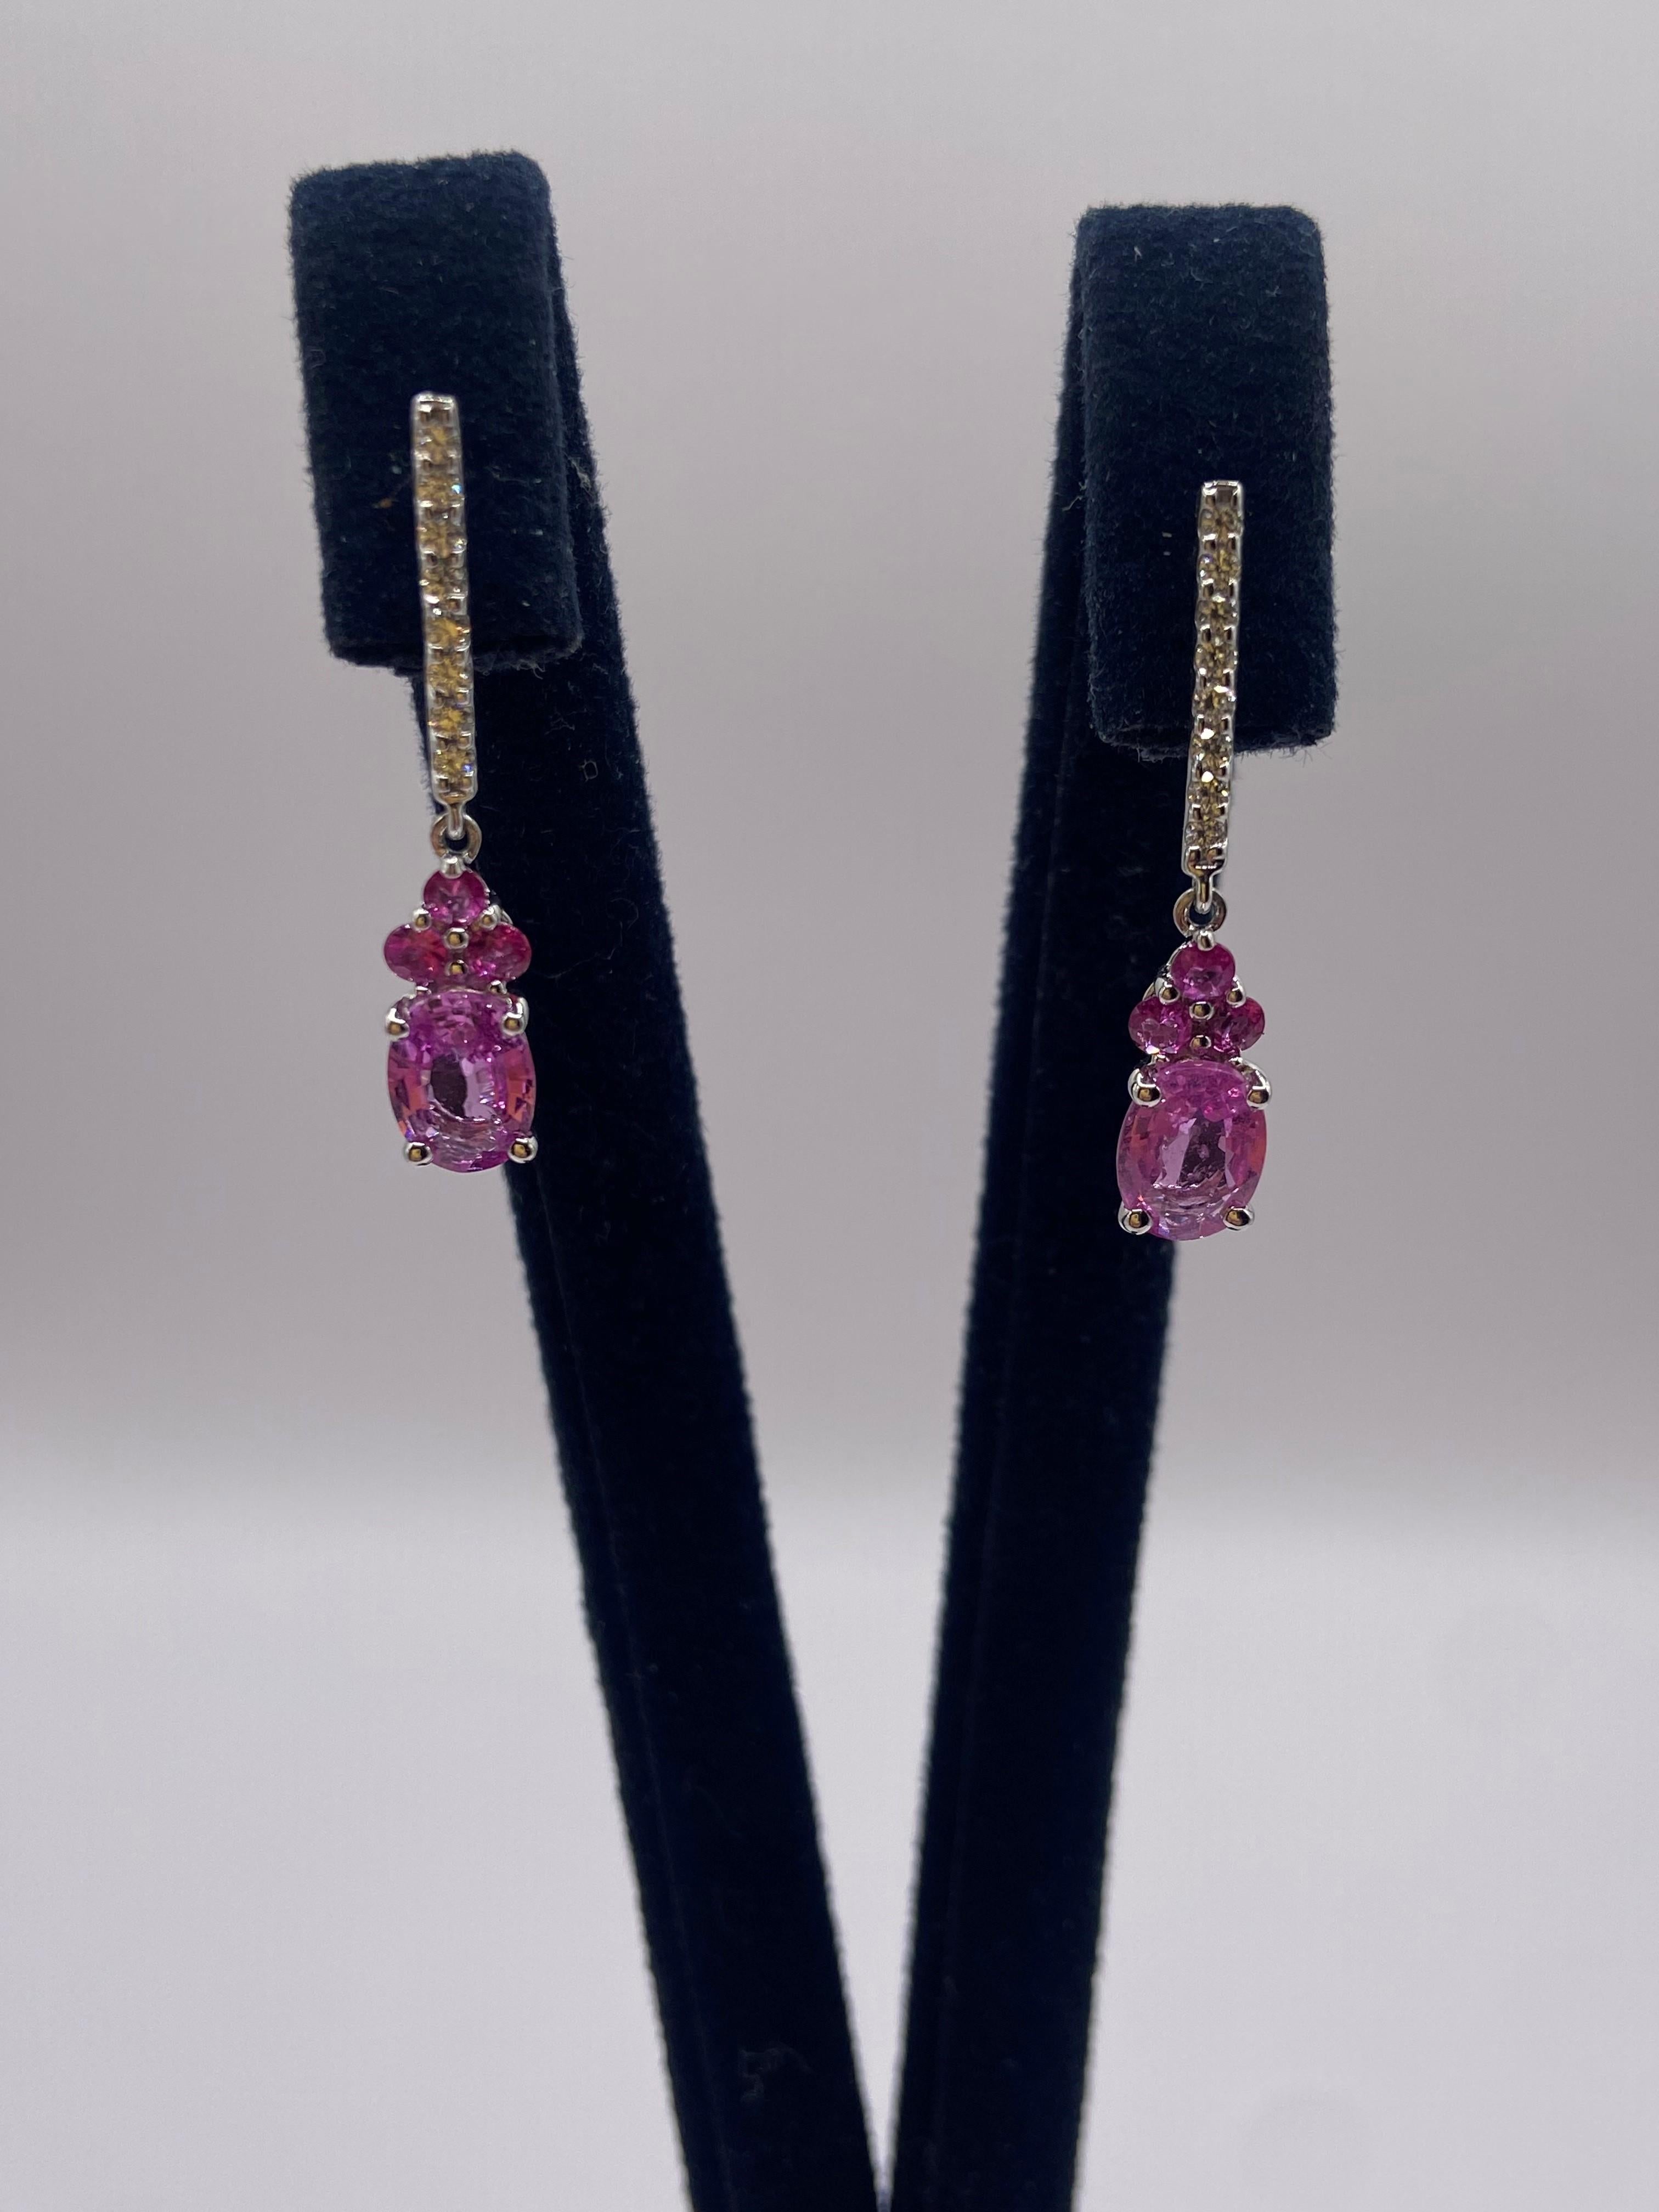 • 14KT White Gold
• 2.00ctw
•  Earrings are sold as a pair (2 pieces)

• Number of Oval Cut Pink Sapphires: 2
• Carat Weight: 1.50ctw
•  Stone Size: 7 x 5mm

• Number of Round Pink Sapphires: 6
• Carat Weight: 0.28ctw

• Number of Round Diamonds: